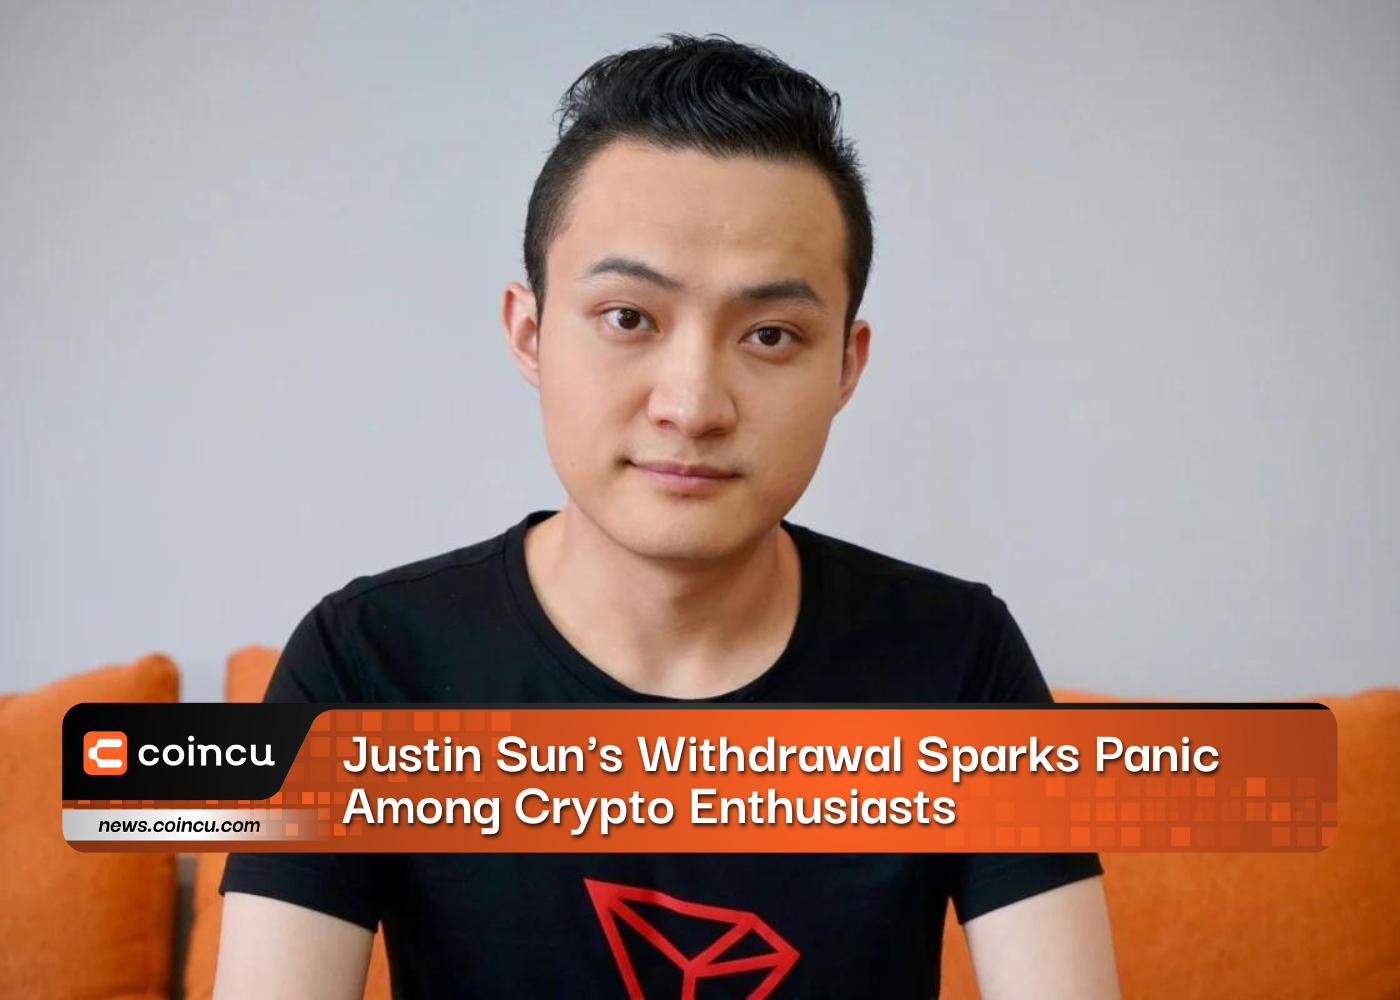 Justin Suns Withdrawal Sparks Panic